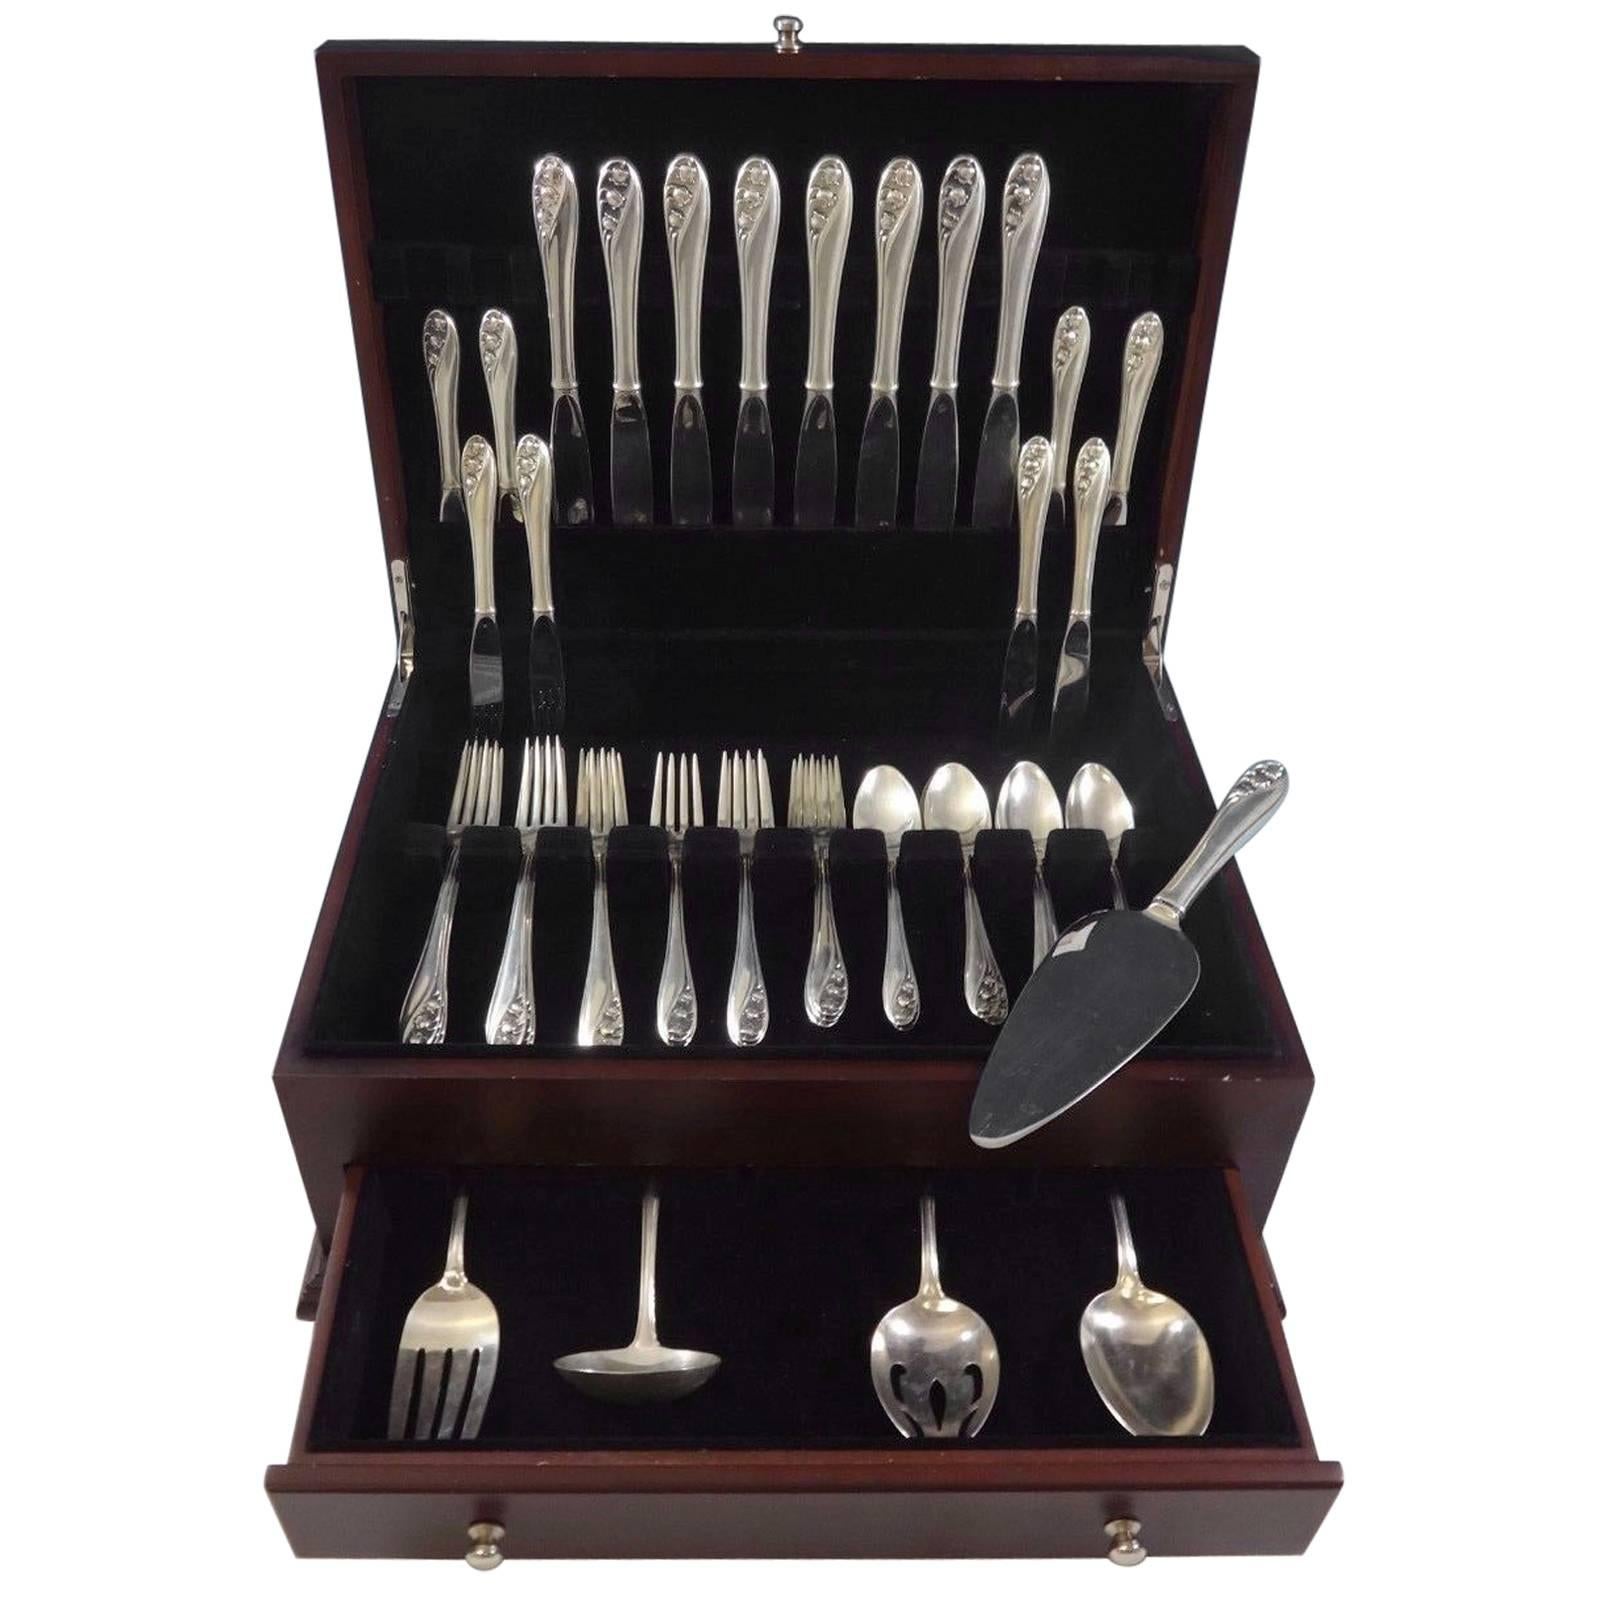 Beautiful Lily of the valley by Gorham sterling silver flatware set of 45 pieces. This set includes: Eight knives, 9